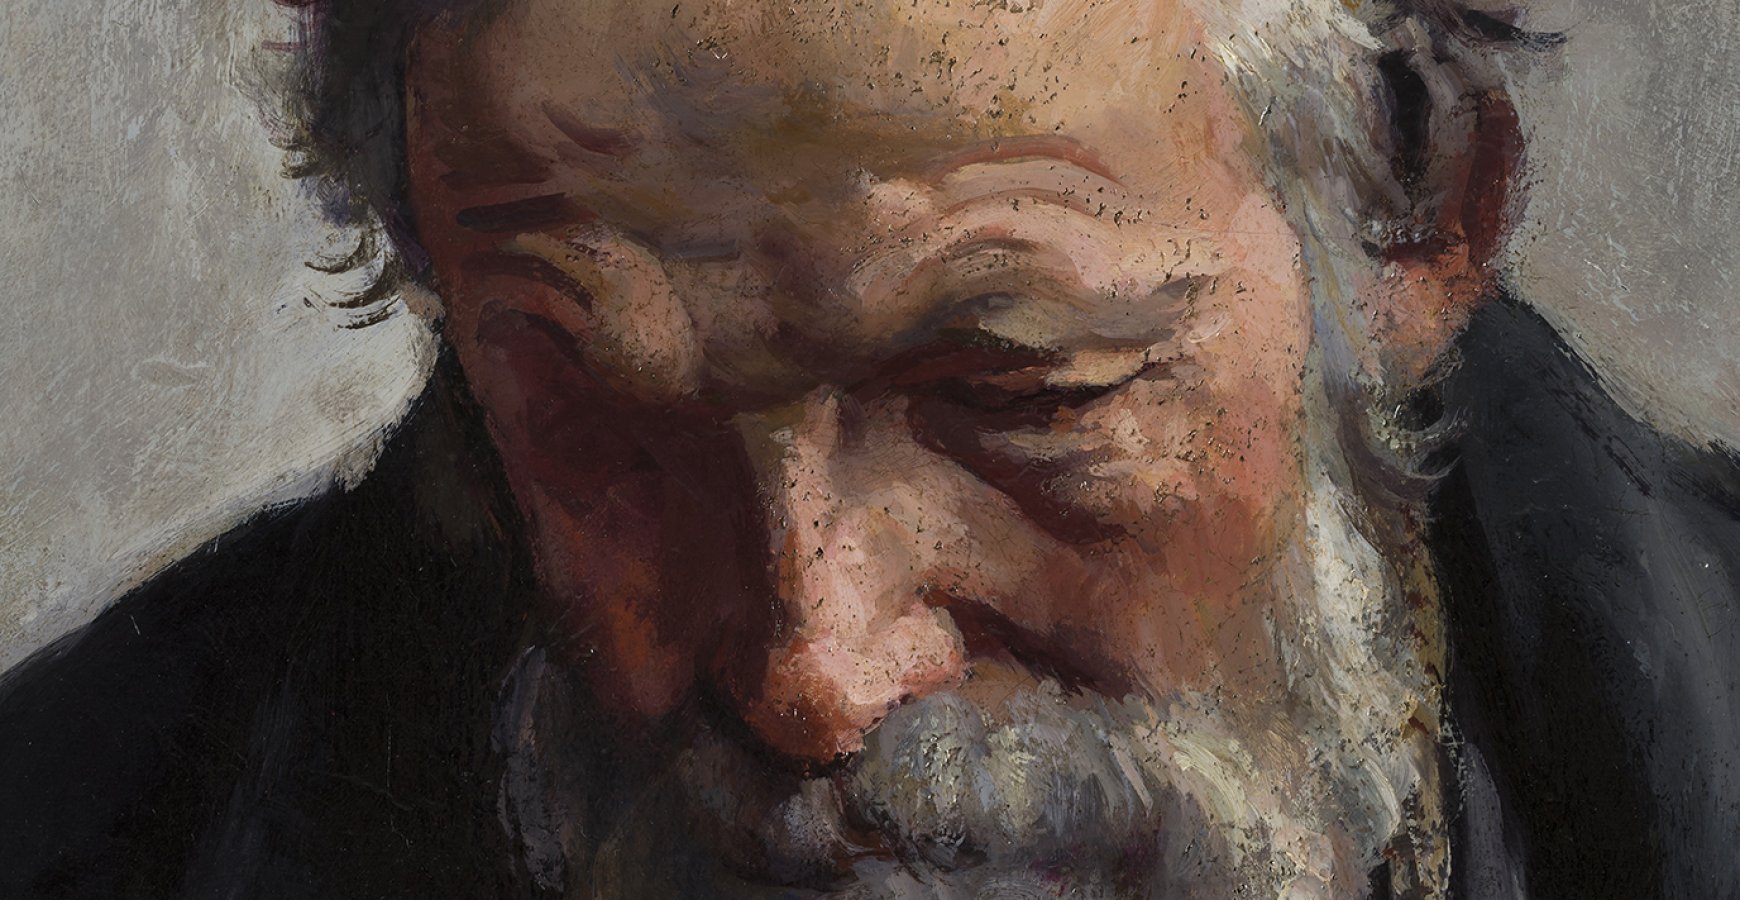 fragment of a painting, a man's face